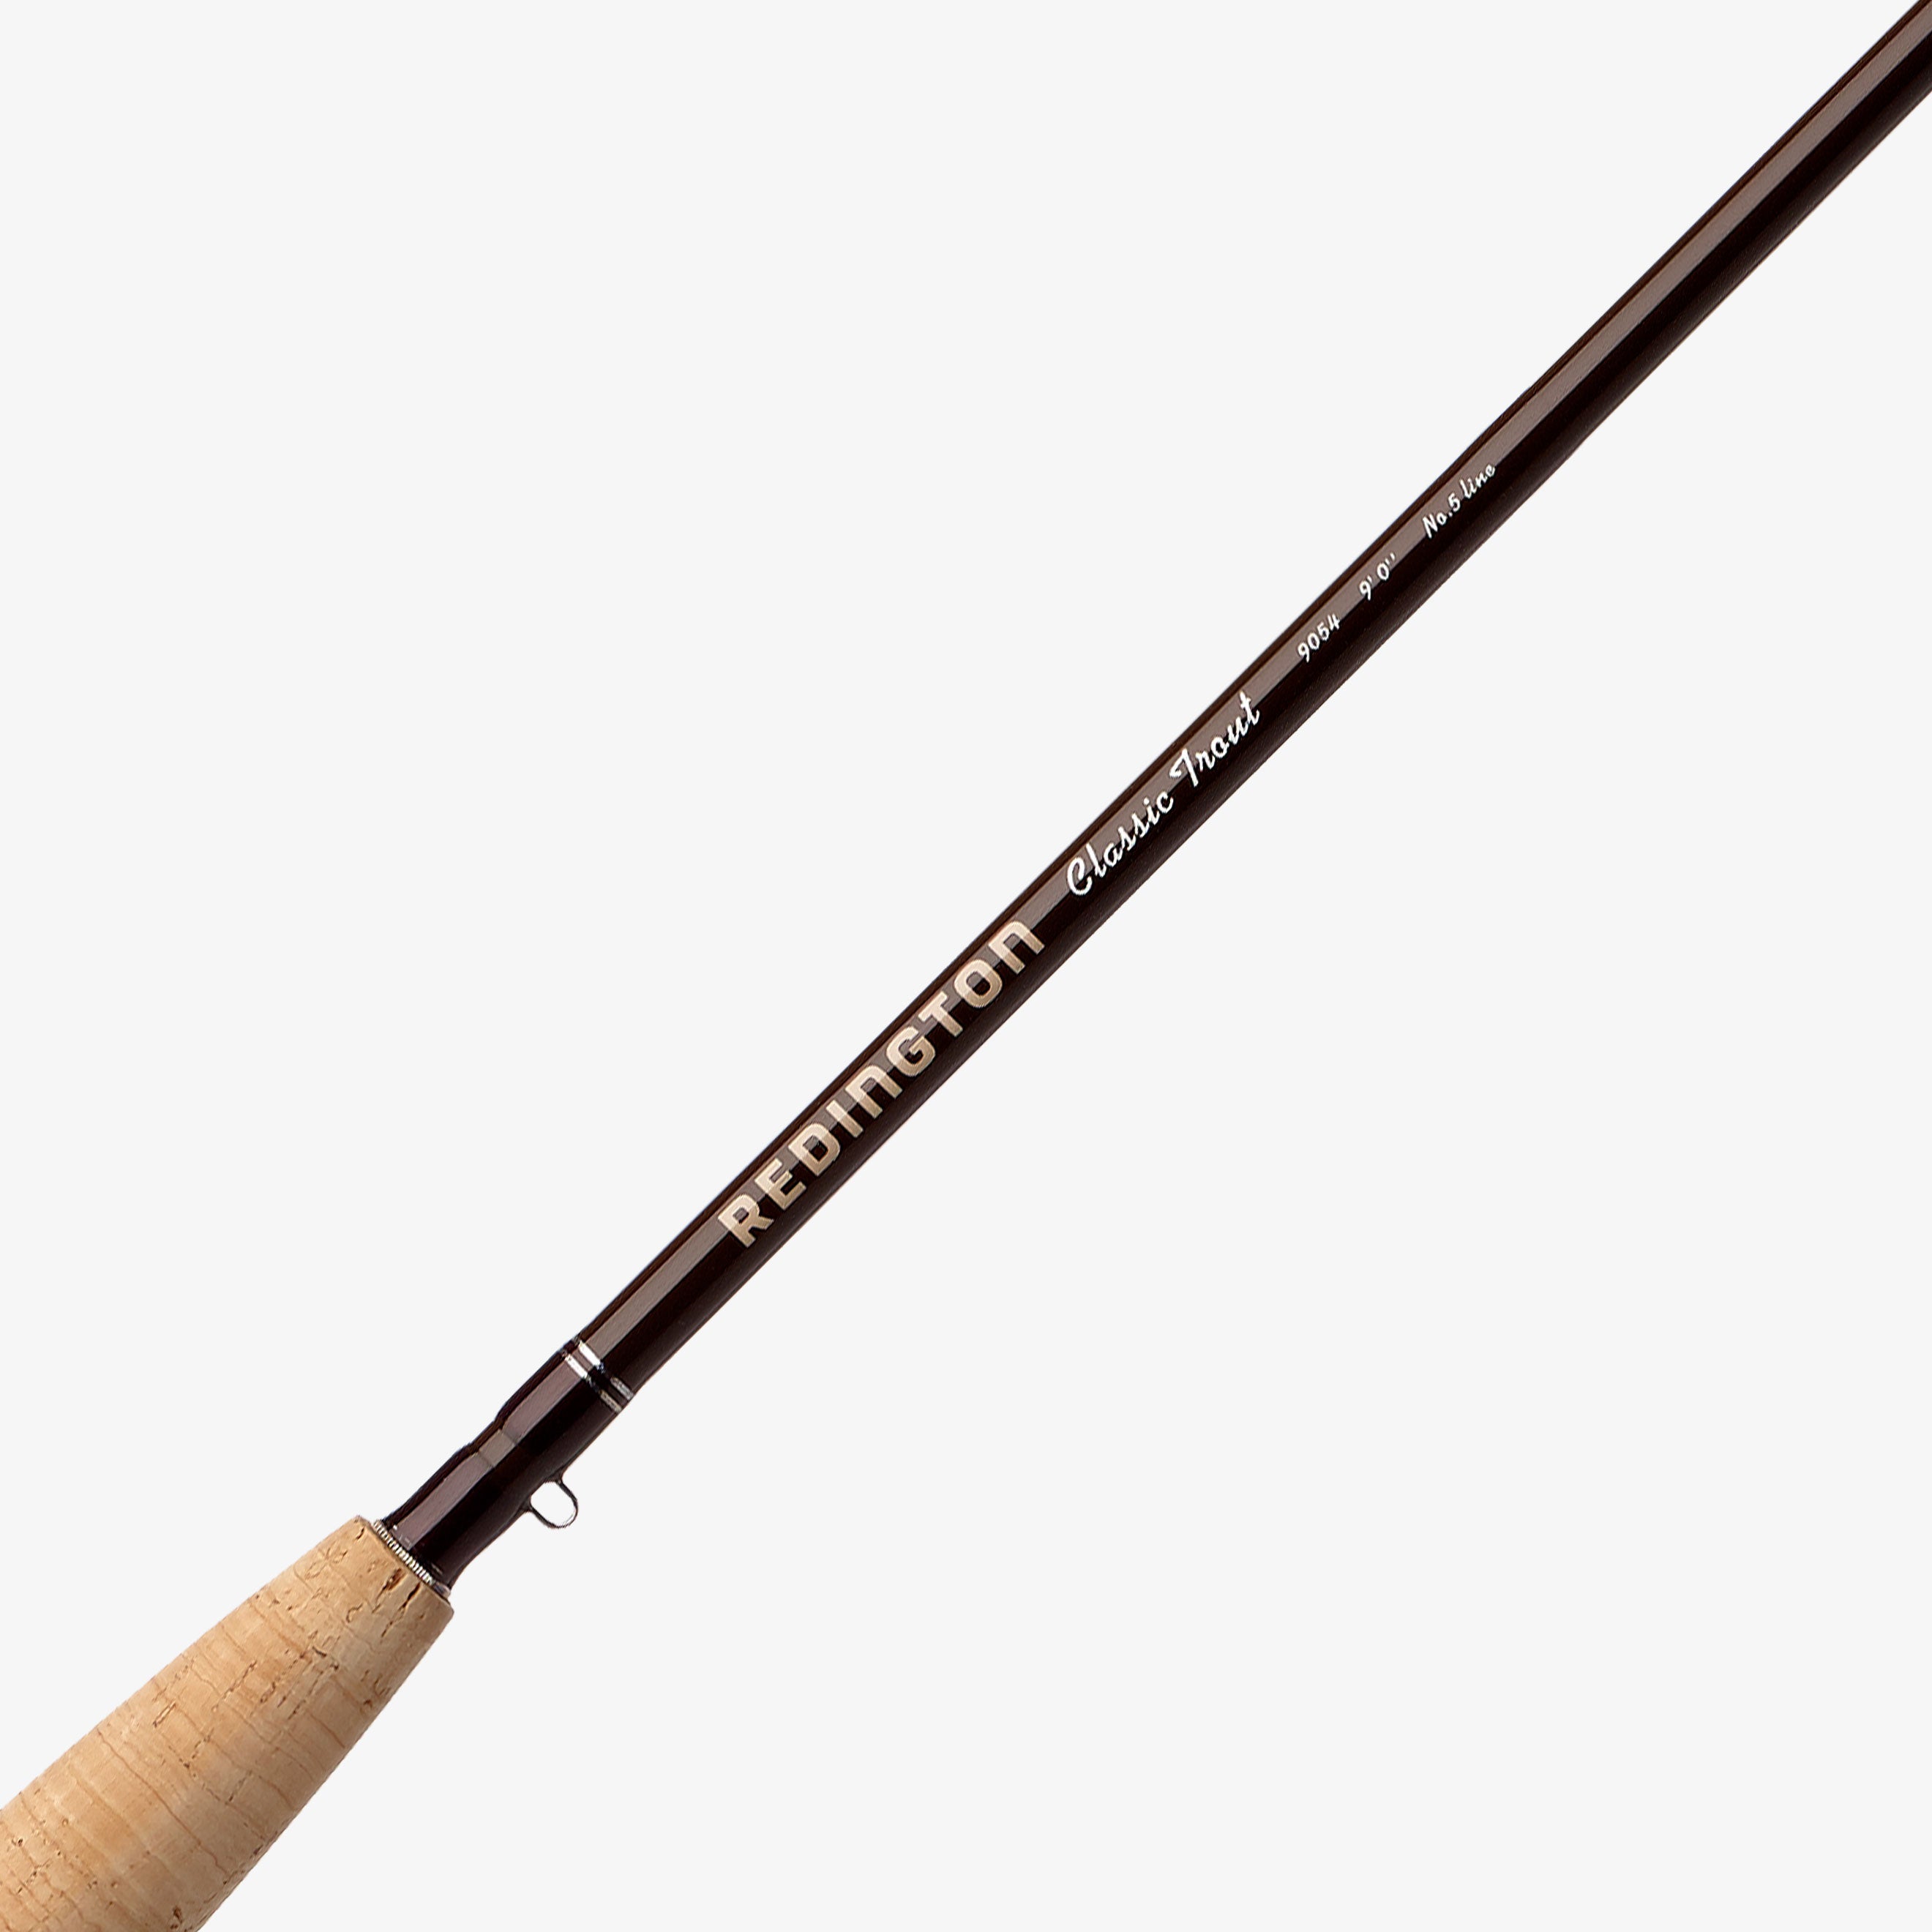 CLASSIC TROUT Fly Fishing Rod 4 Weight, 8ft